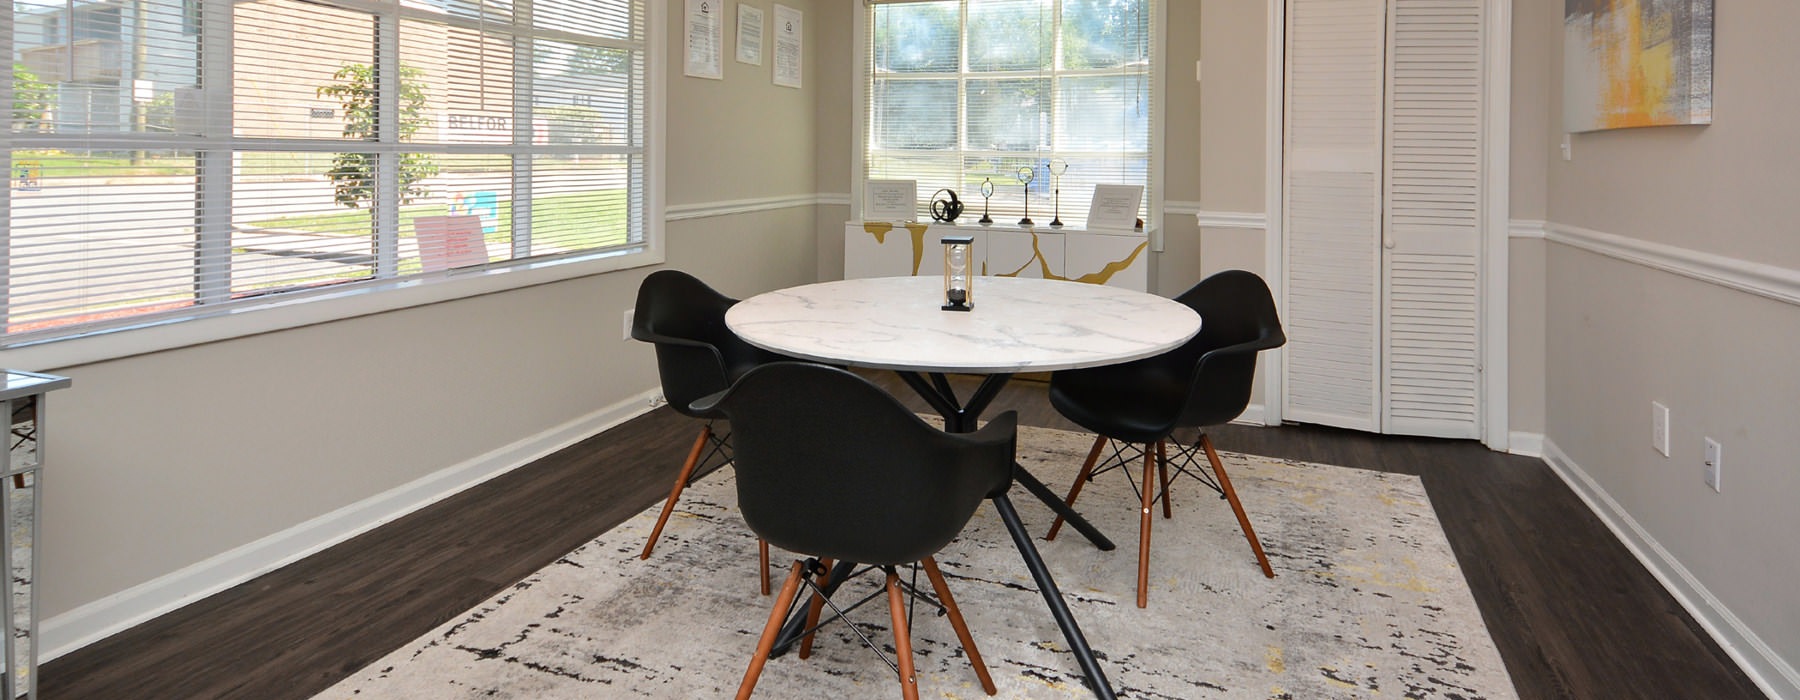 stylize lighting over table with chairs in leasing office